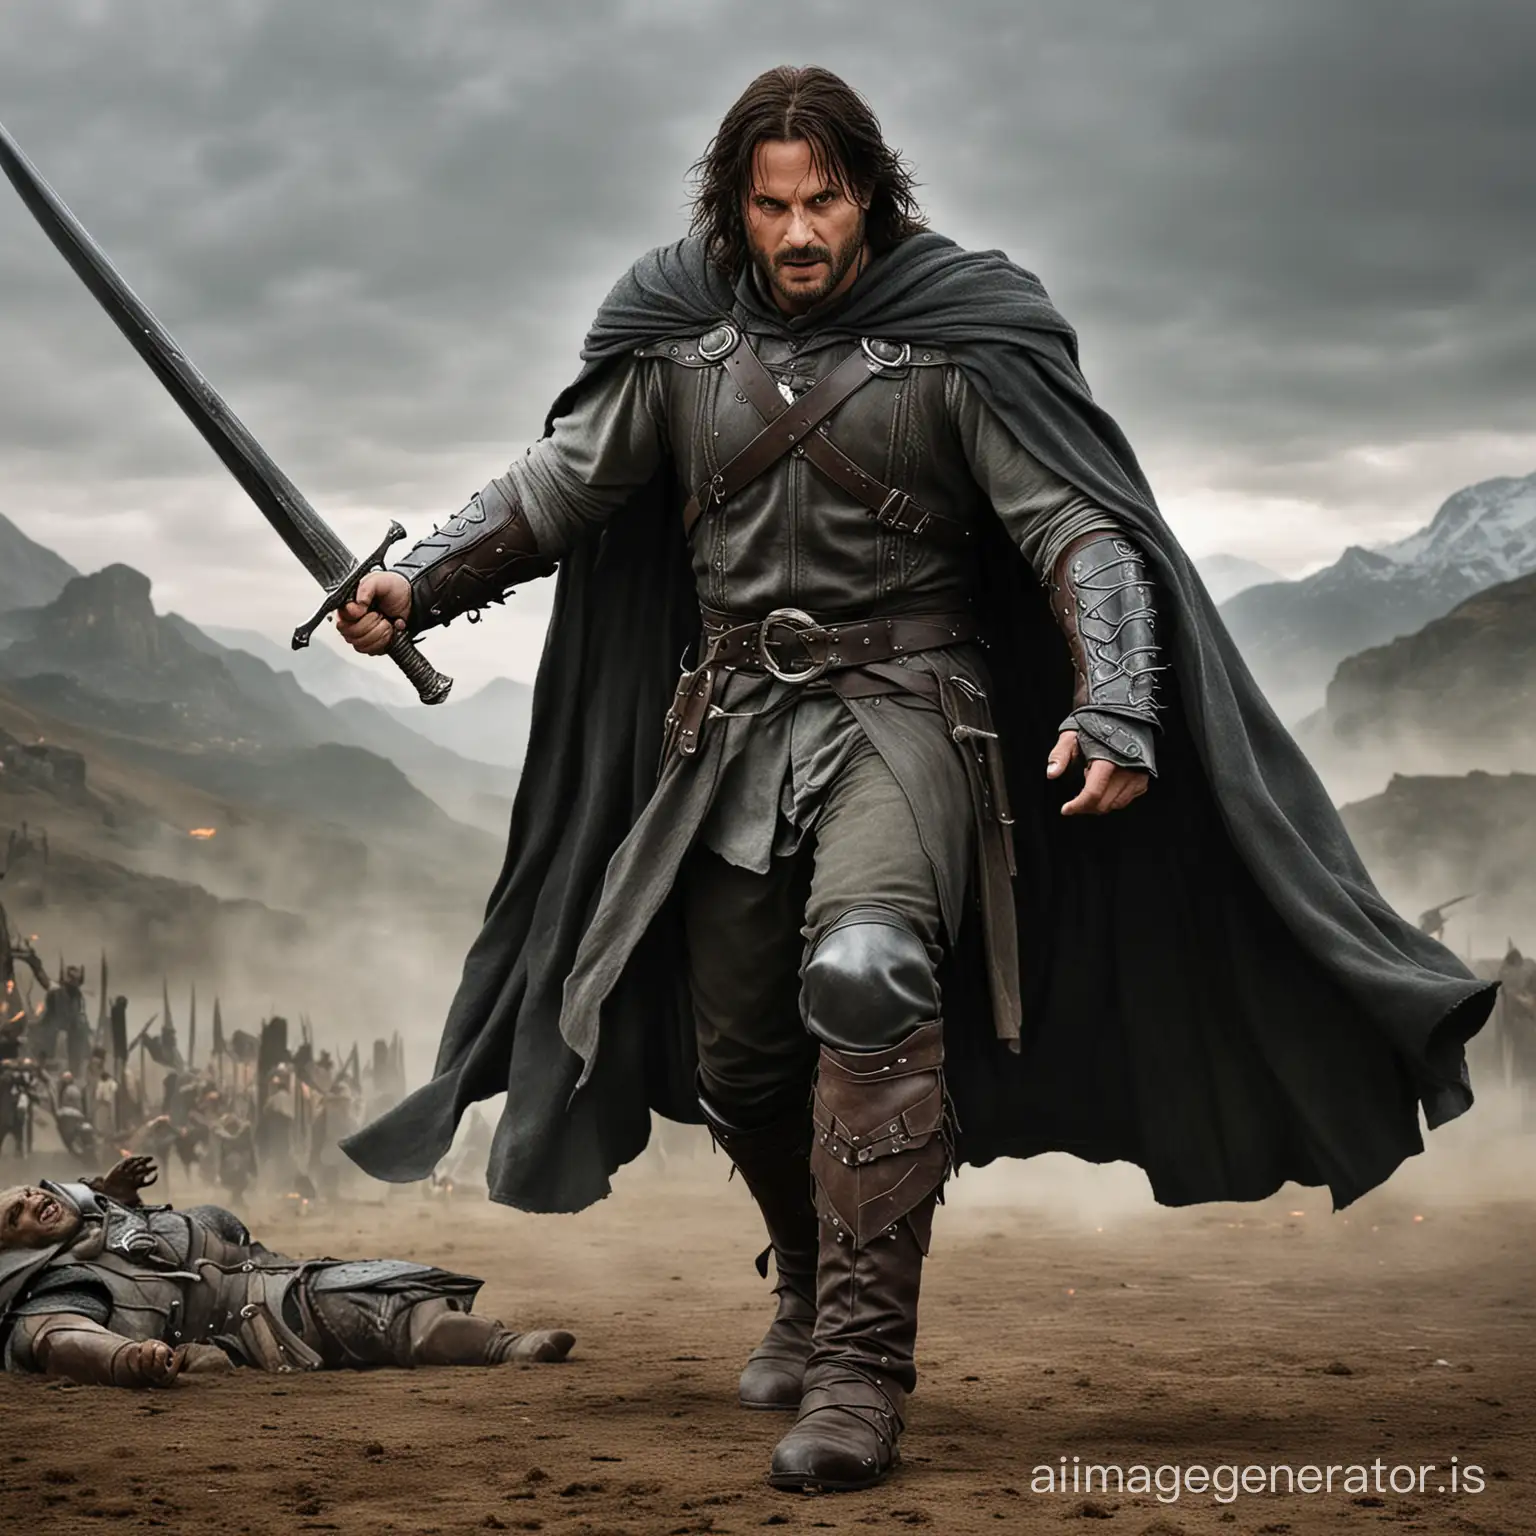 Aragorn-Battle-Scene-Heroic-Duel-with-Orclike-Monster